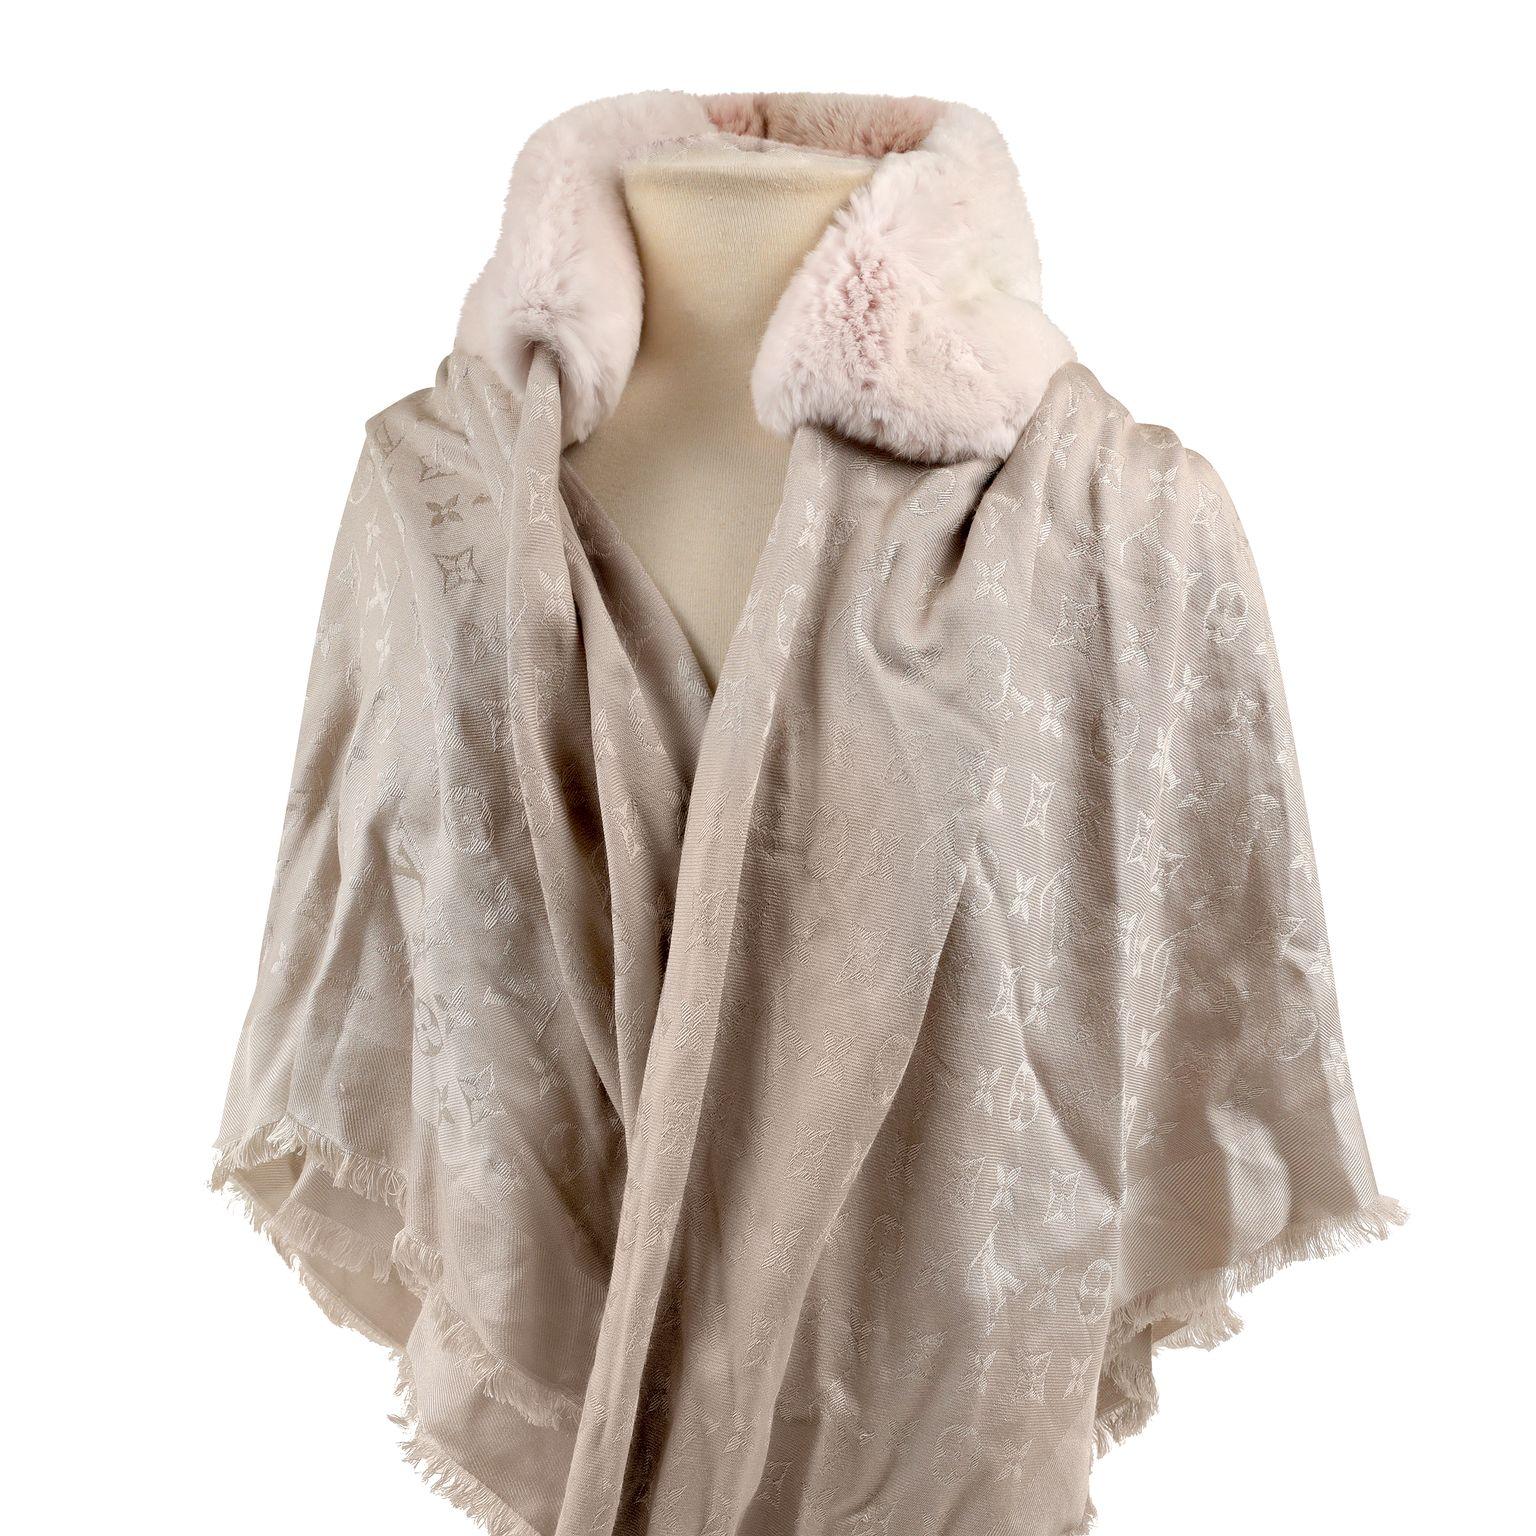 This authentic Louis Vuitton Pink Mink Monogram Shawl is a limited edition in excellent condition.  Blush pink silk blend LV monogram shawl with mink collar and floral accents.  

PBF 13833
